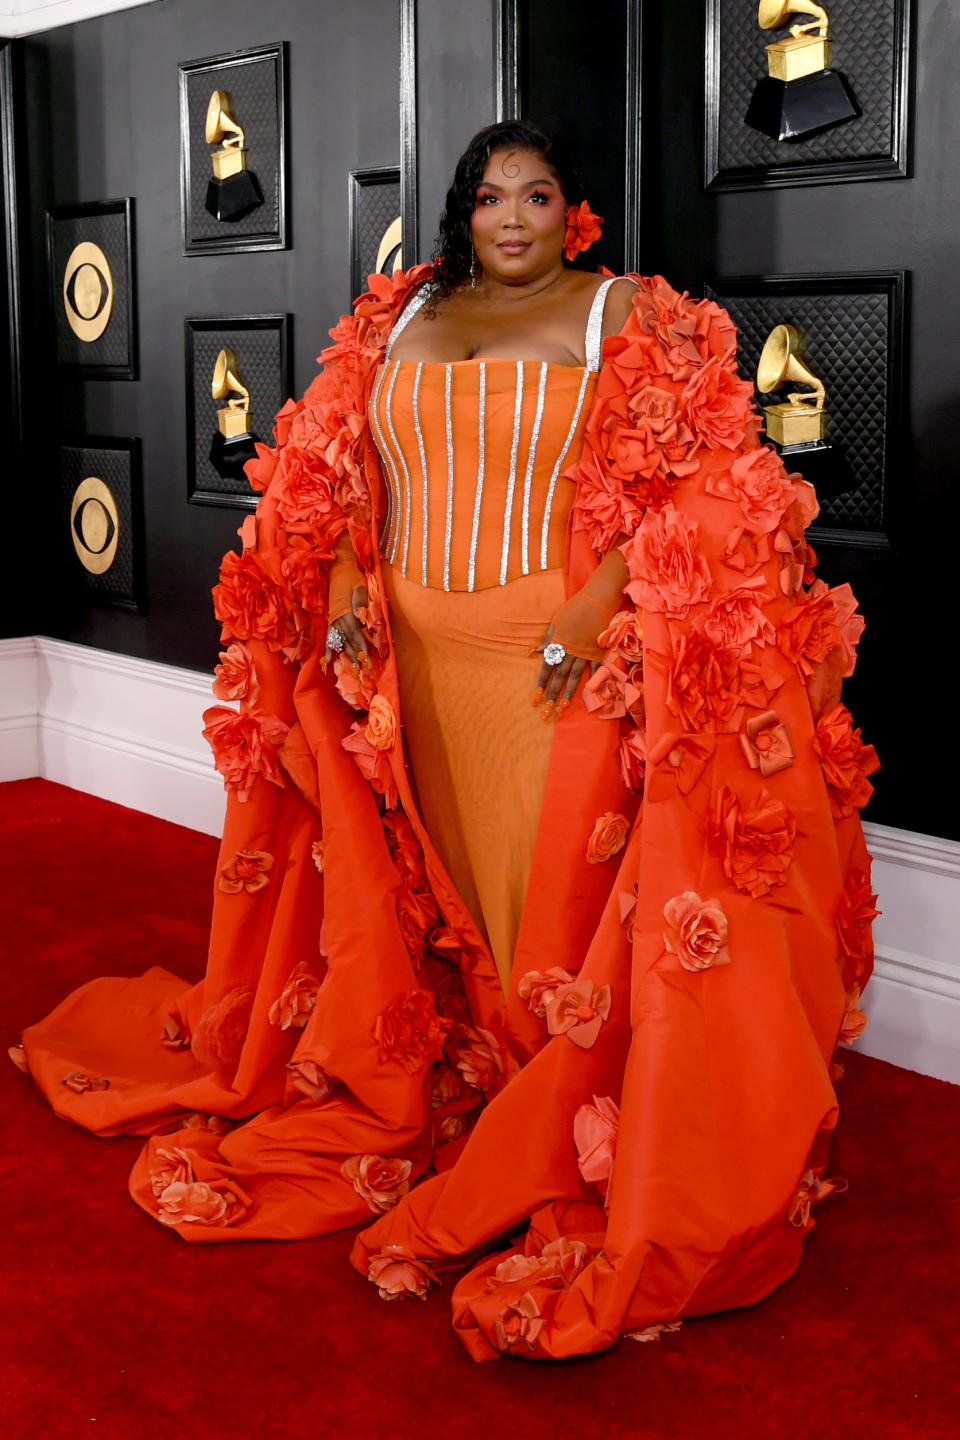 LOS ANGELES, CALIFORNIA - FEBRUARY 05: (FOR EDITORIAL USE ONLY) Lizzo attends the 65th GRAMMY Awards on February 05, 2023 in Los Angeles, California. (Photo by Jon Kopaloff/WireImage)